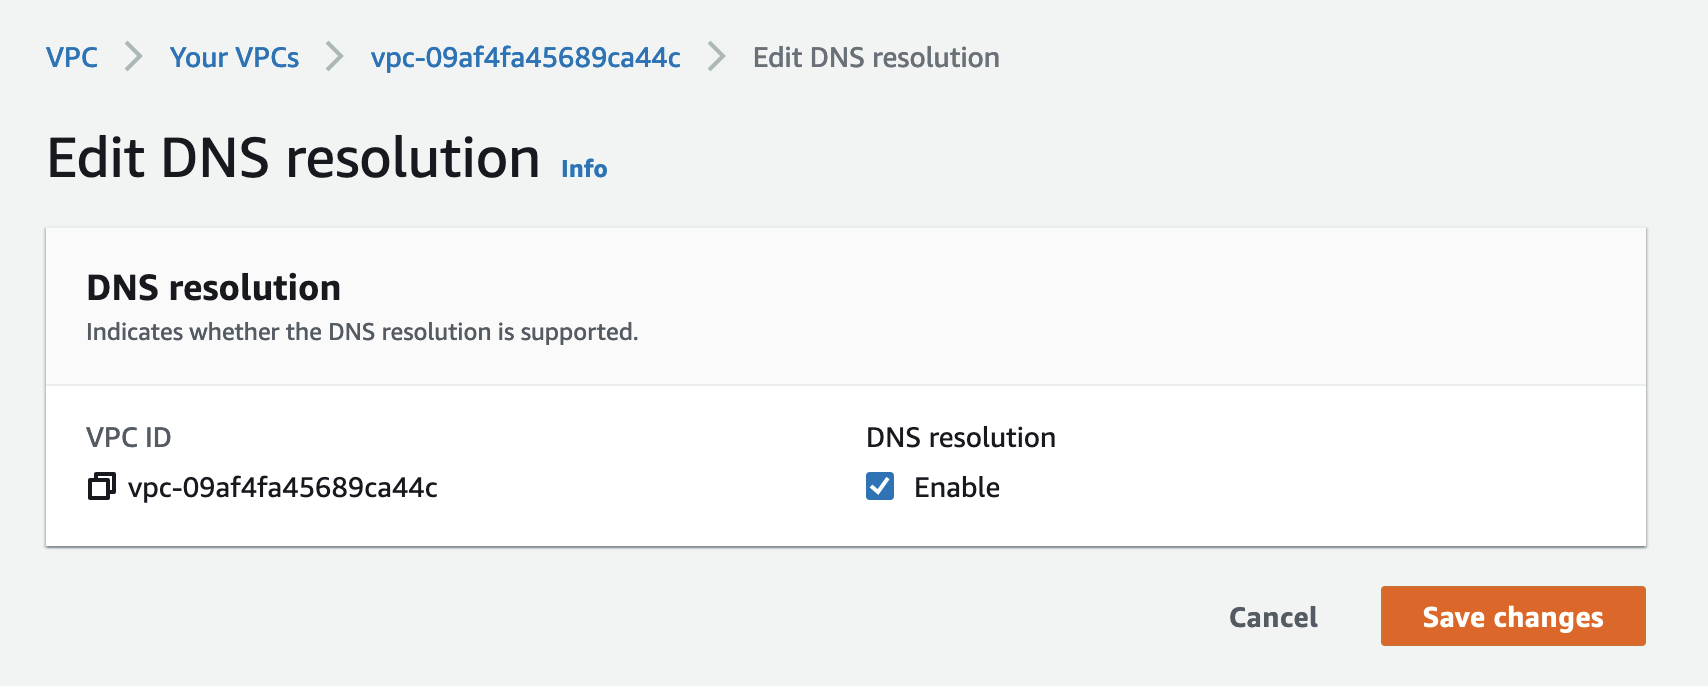 Enable DNS resolution for the VPC.